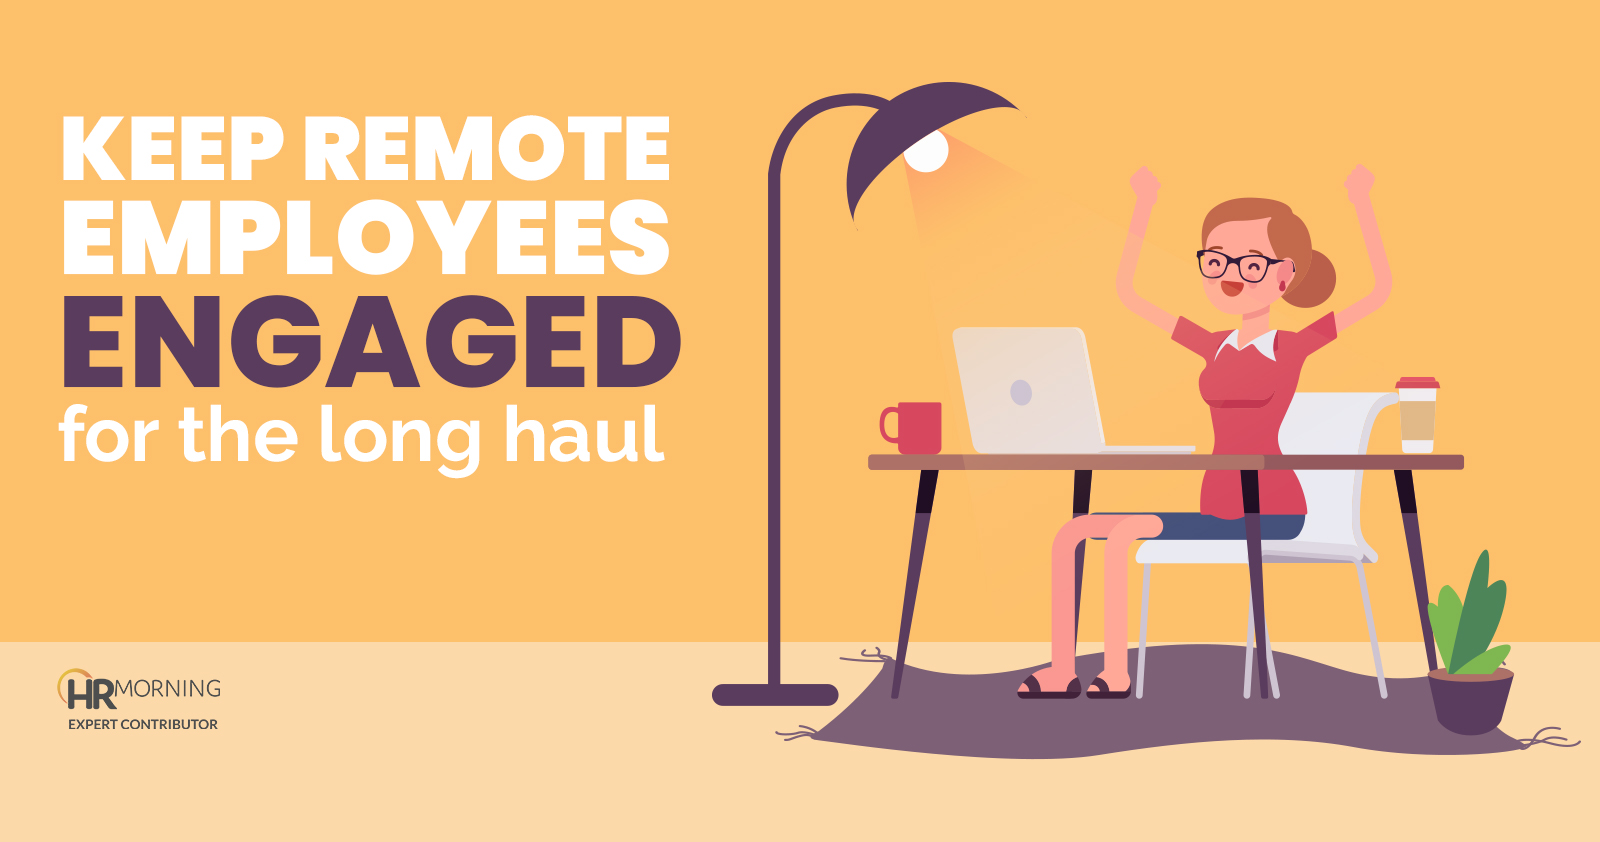 keep remote employees engaged for the long haul